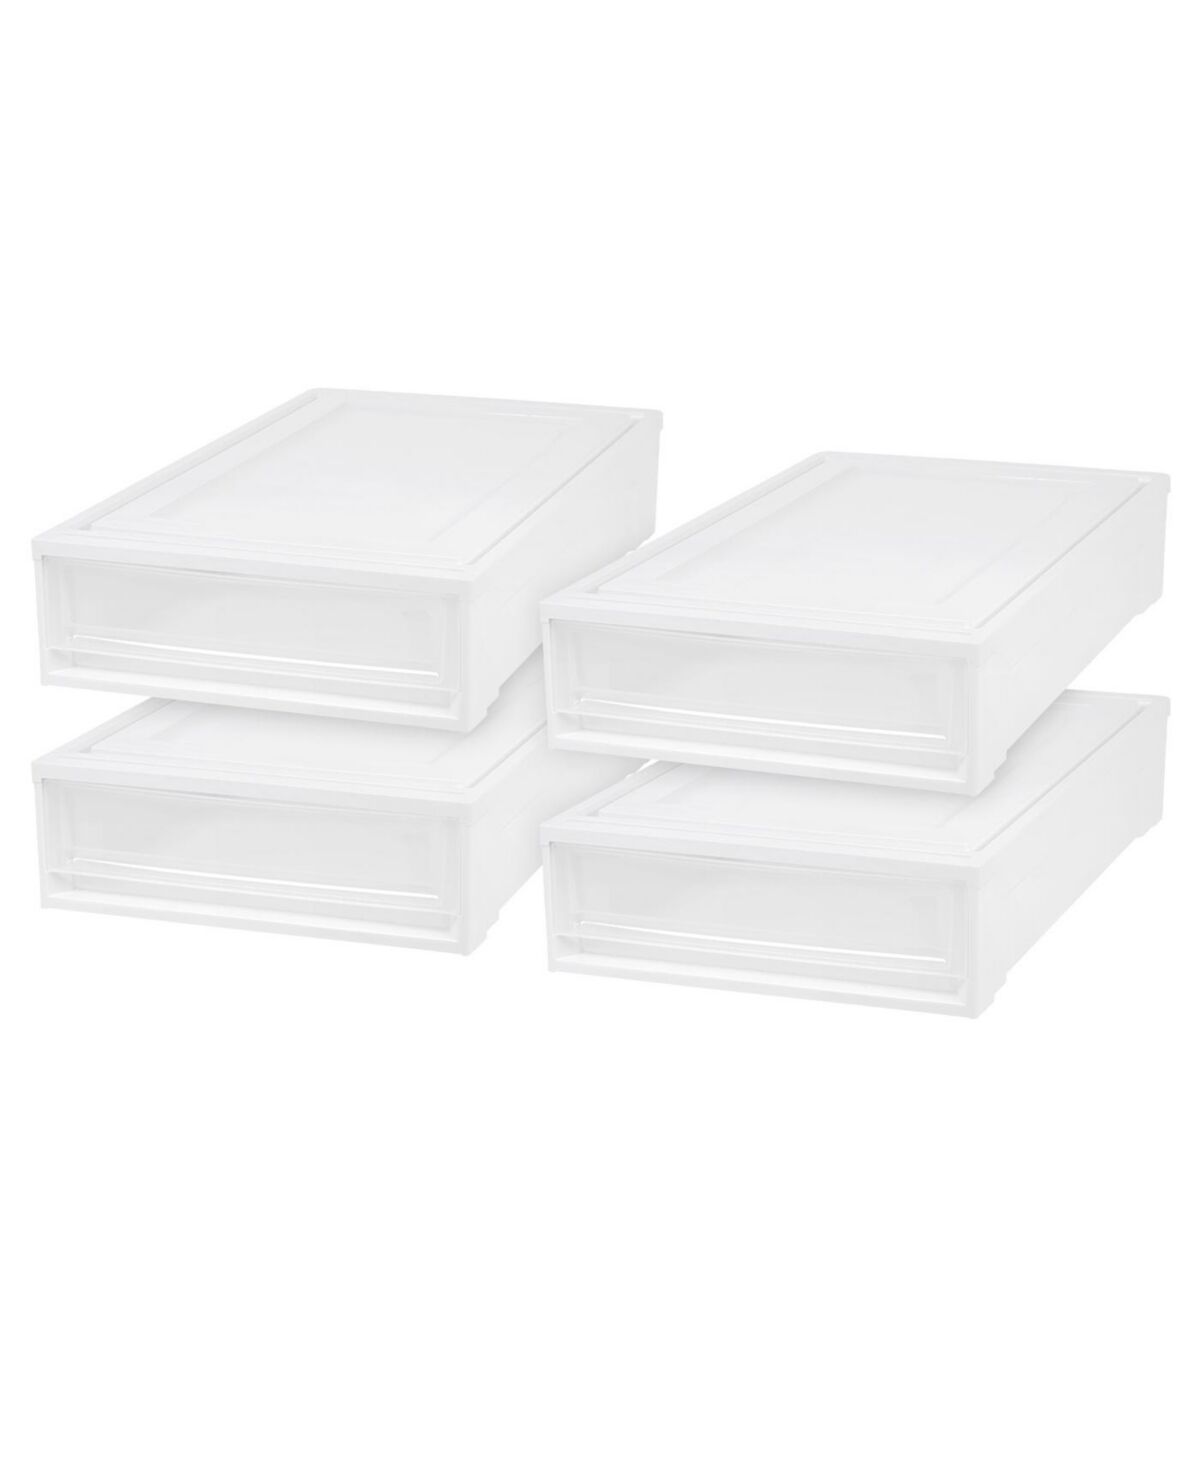 Iris Usa 4 Pack 27.5qt Plastic Under Bed Storage Containers with Sliding Organizer Drawers, White - White